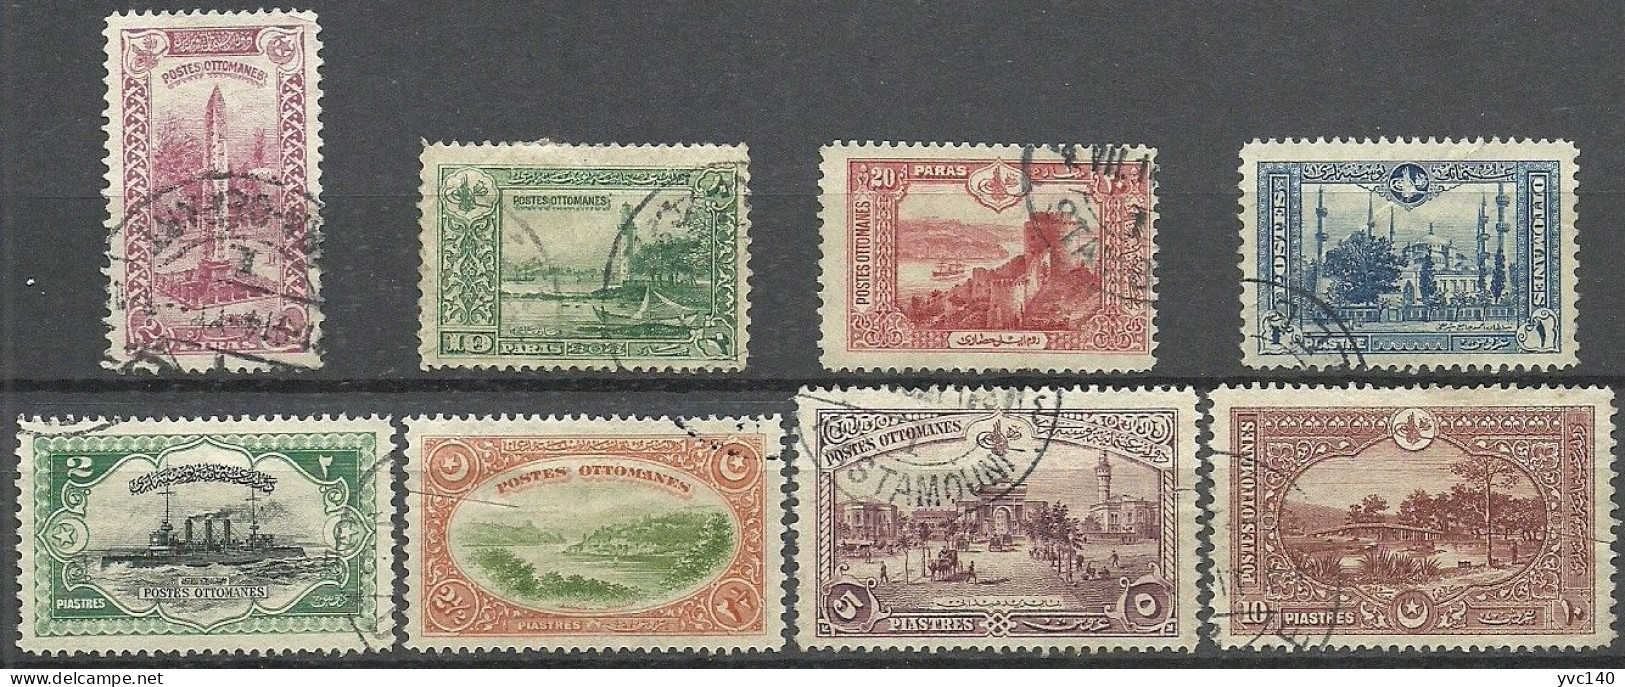 Turkey; 1914 Istanbul Pictorial London Printing Postage Stamps - Used Stamps